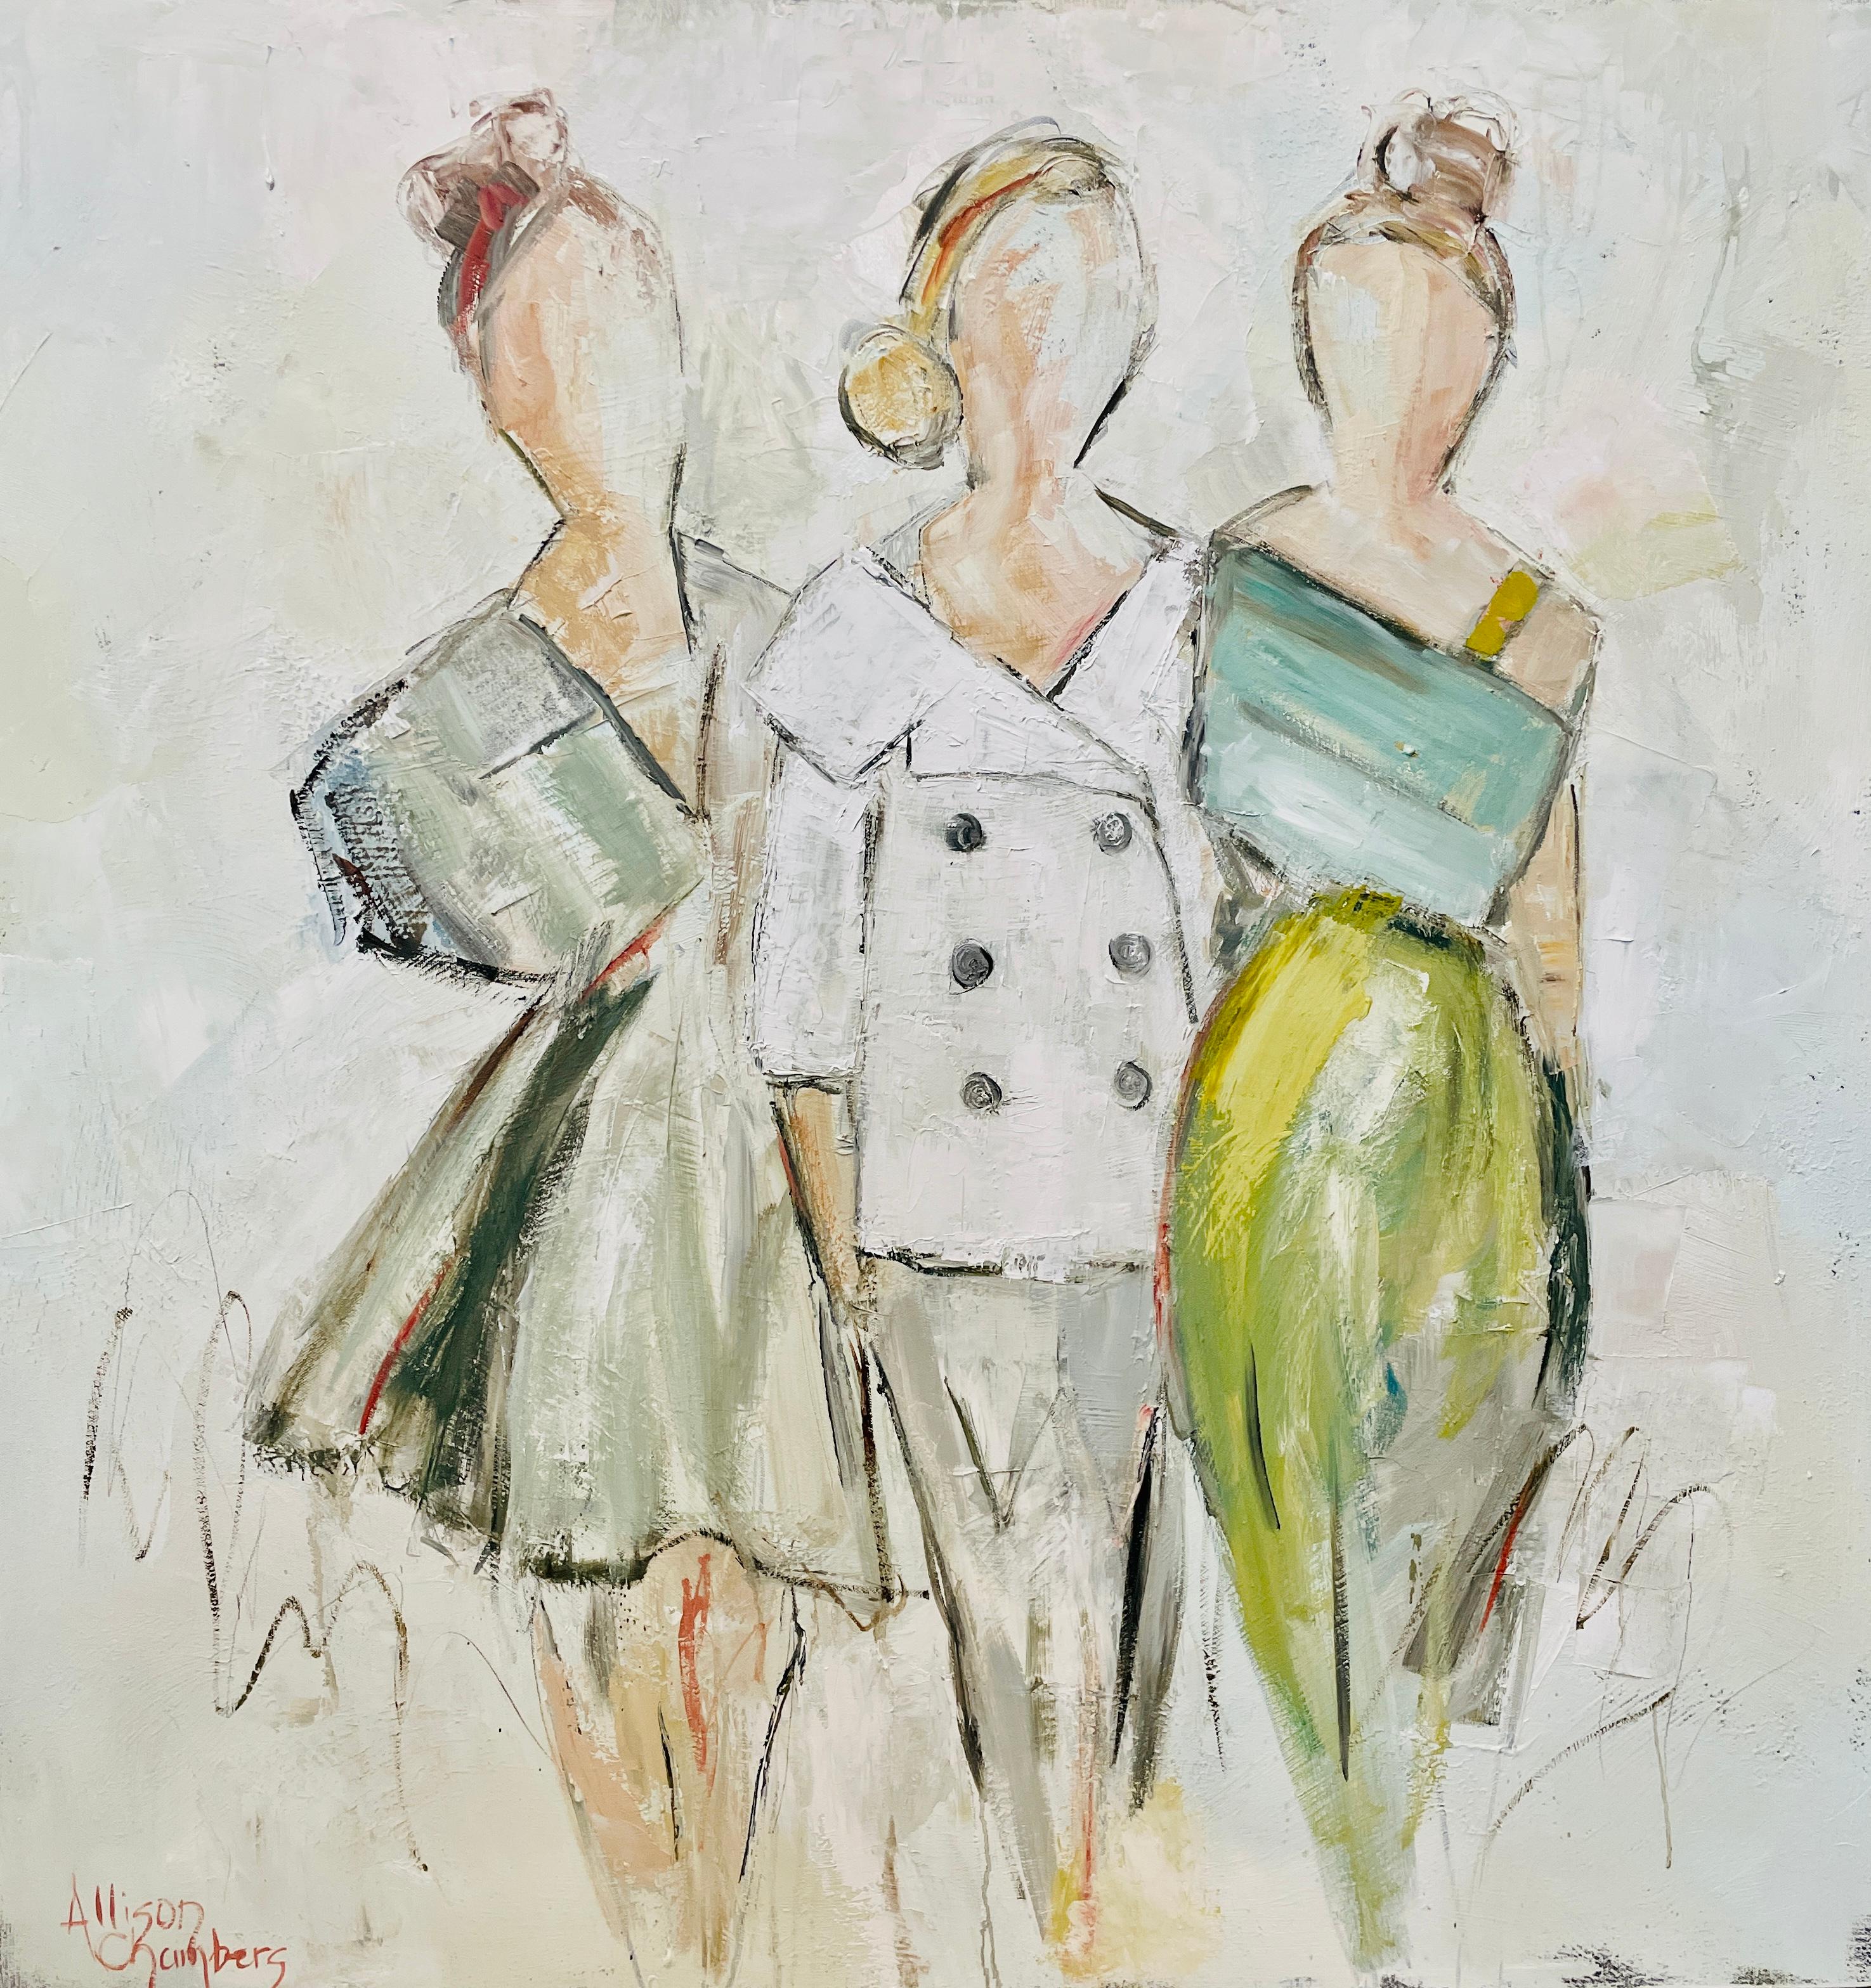 Trio by Allison Chambers, Framed Figurative Oil on Canvas Painting